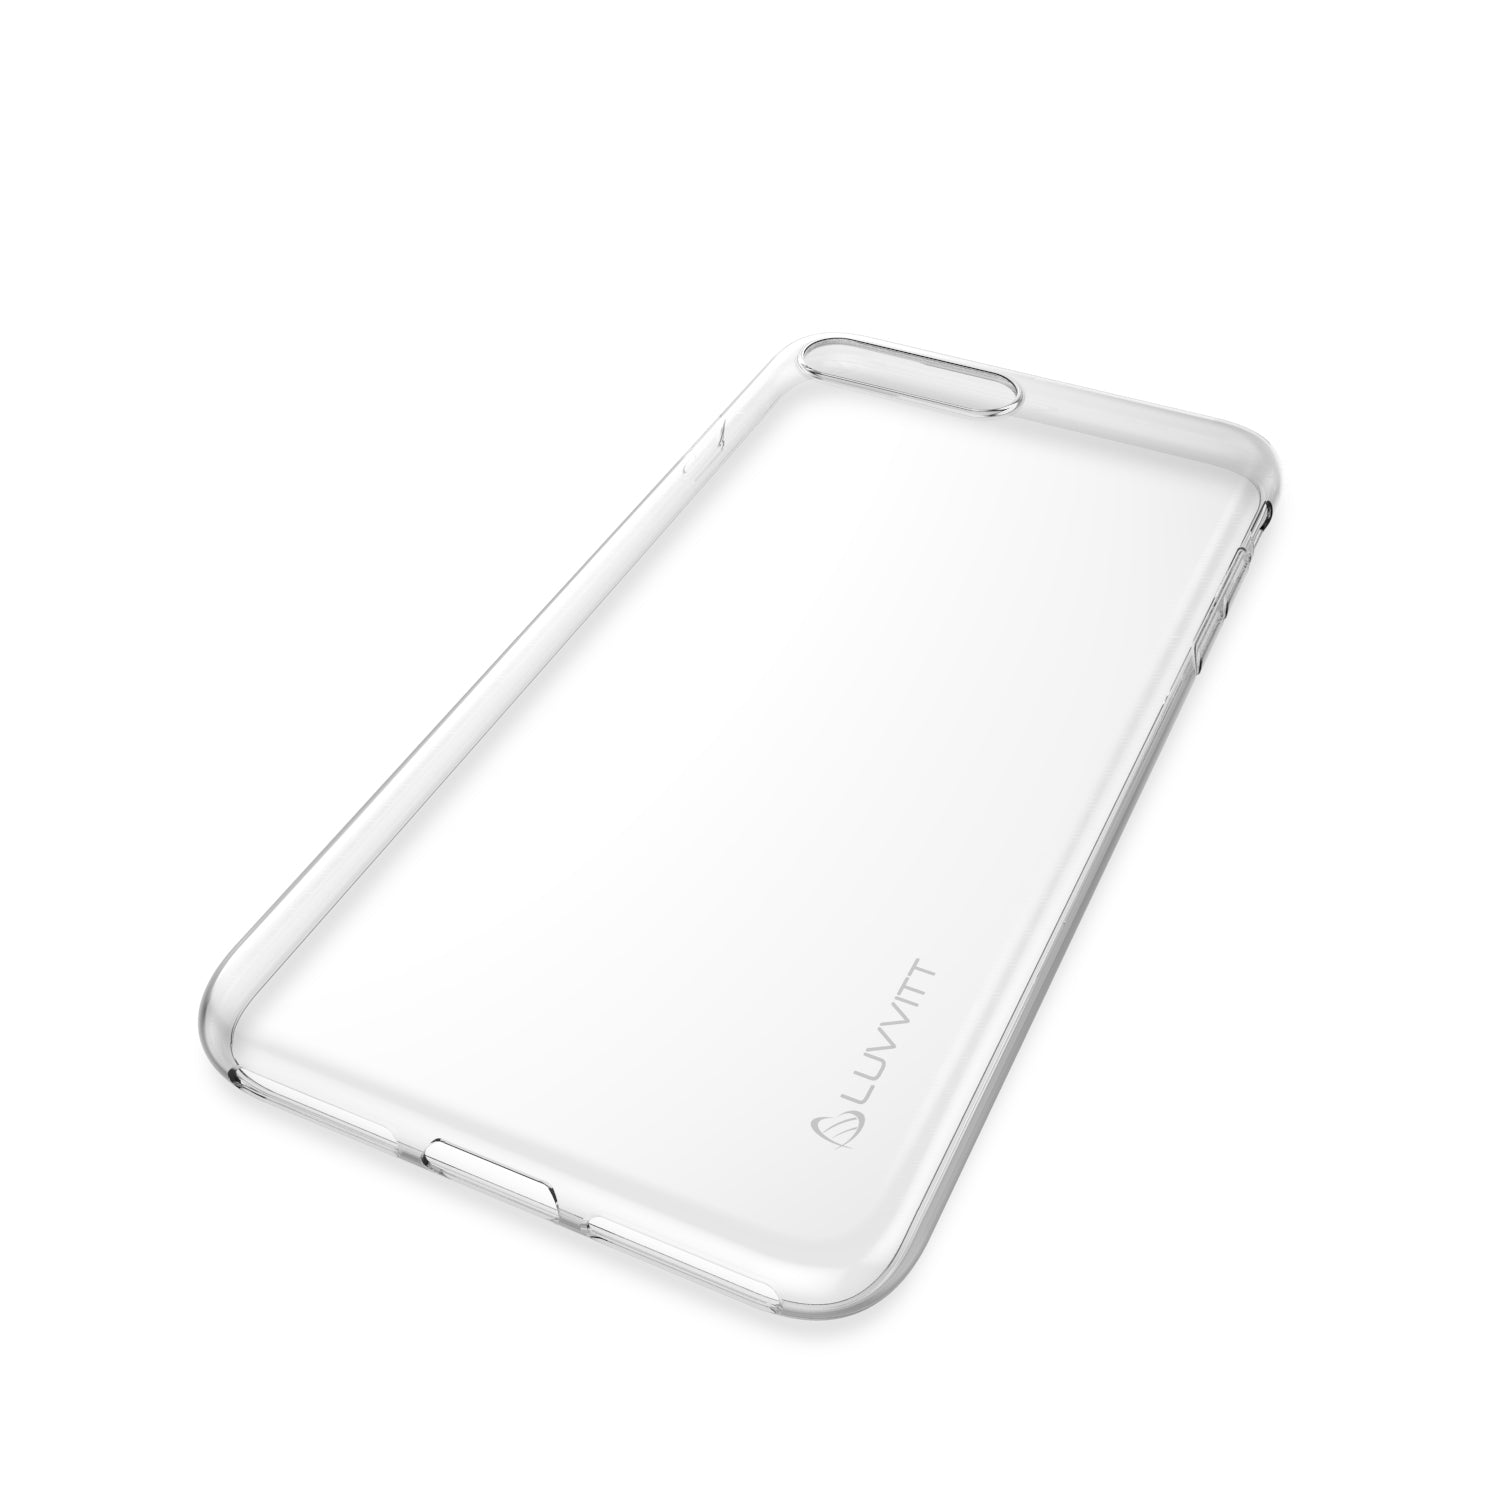 Luvvitt Ultra Slim Case for iPhone 8 Plus - Clear